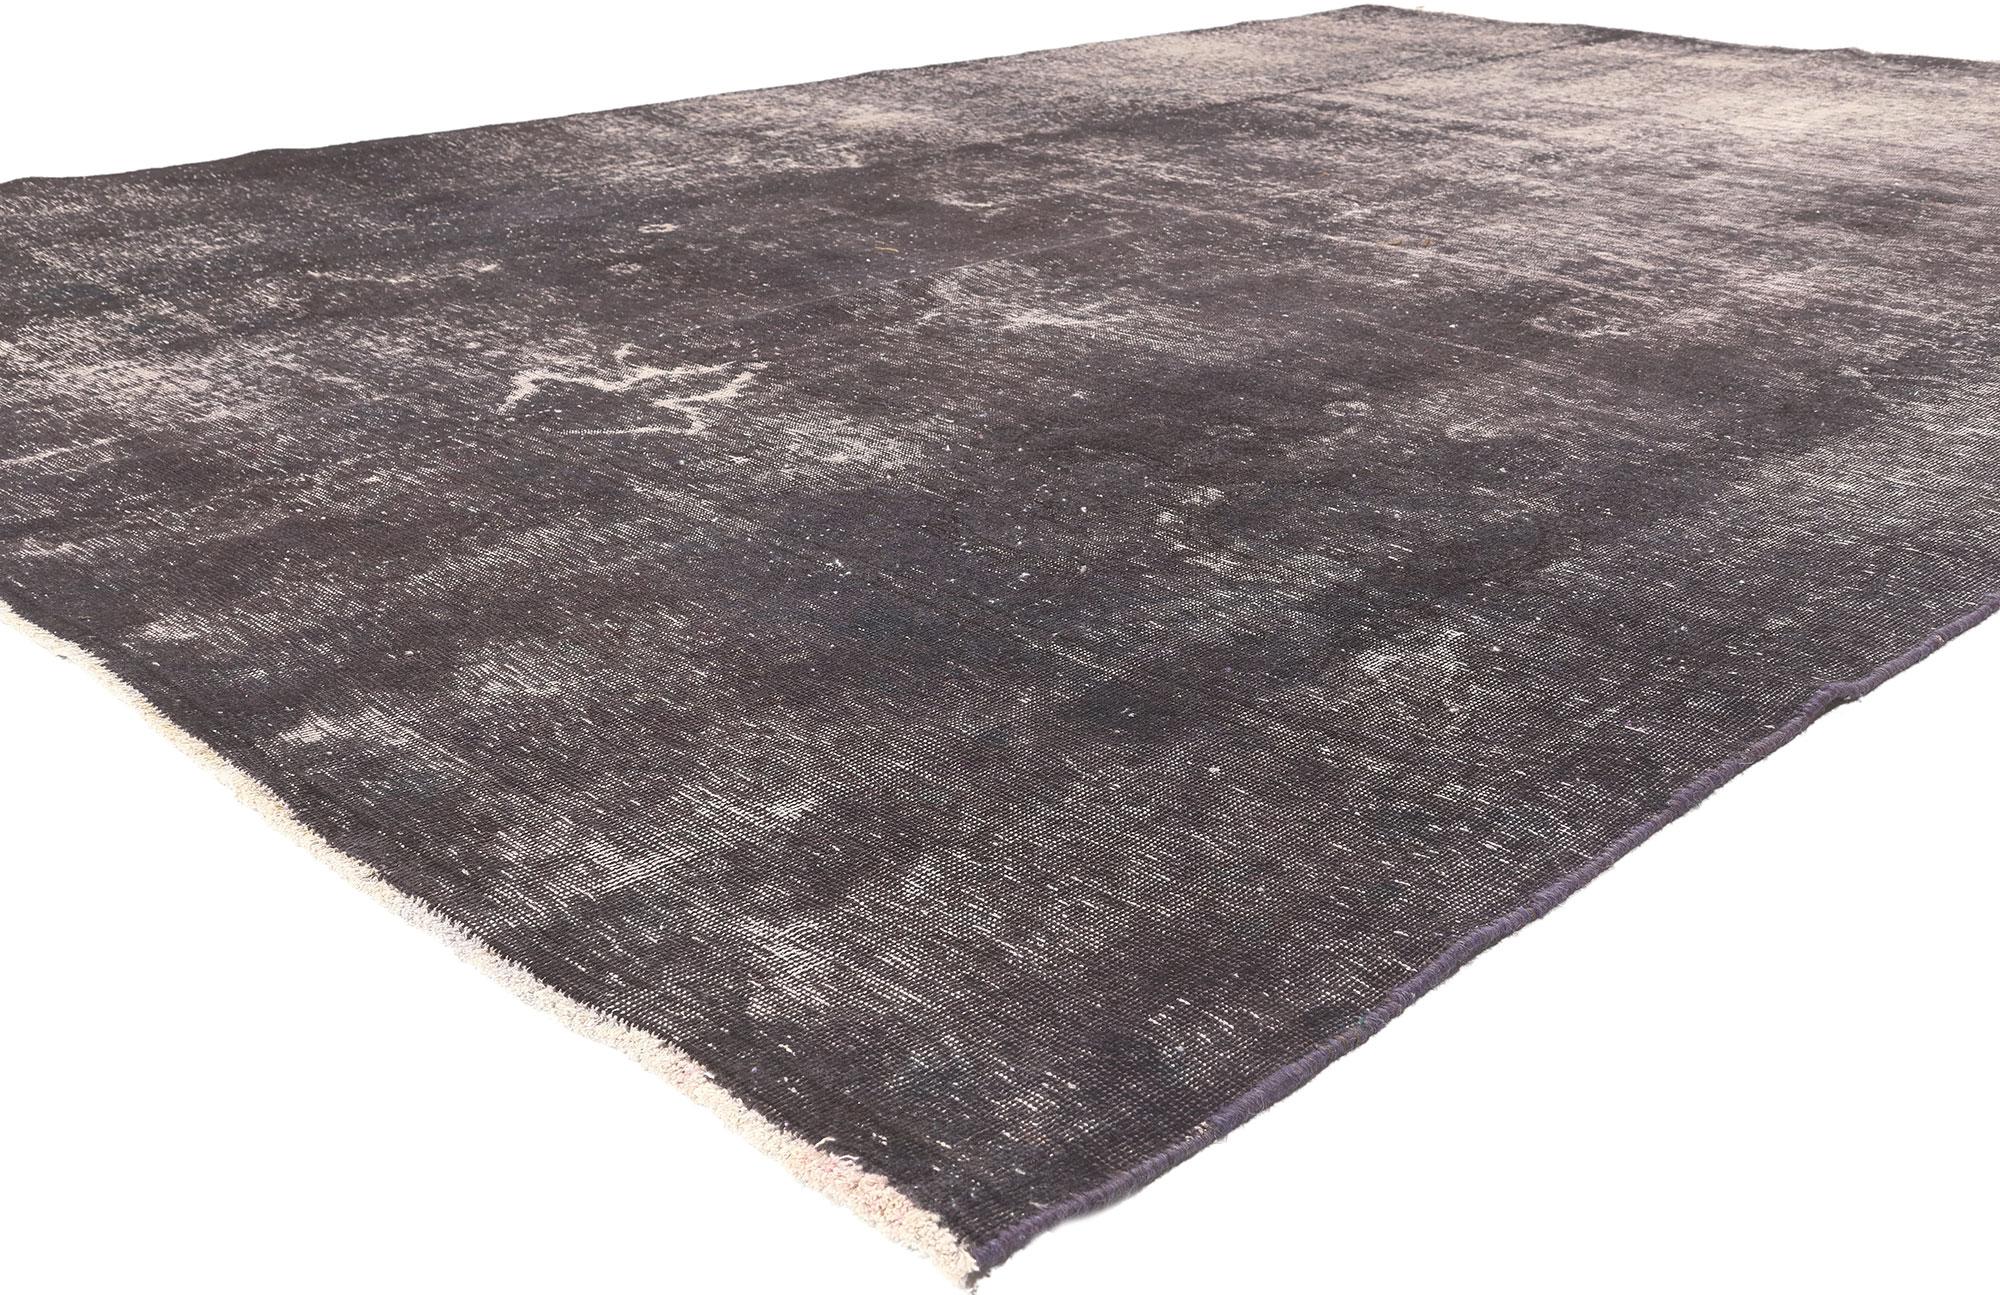 60684 Vintage Turkish Overdyed Rug, 08'04 x 12'03. 
​In an esoteric convergence of modern industrial style and the iconic influence of Bauhaus design, behold this hand-knotted wool vintage Turkish overdyed rug. Revel in its discreet geometric